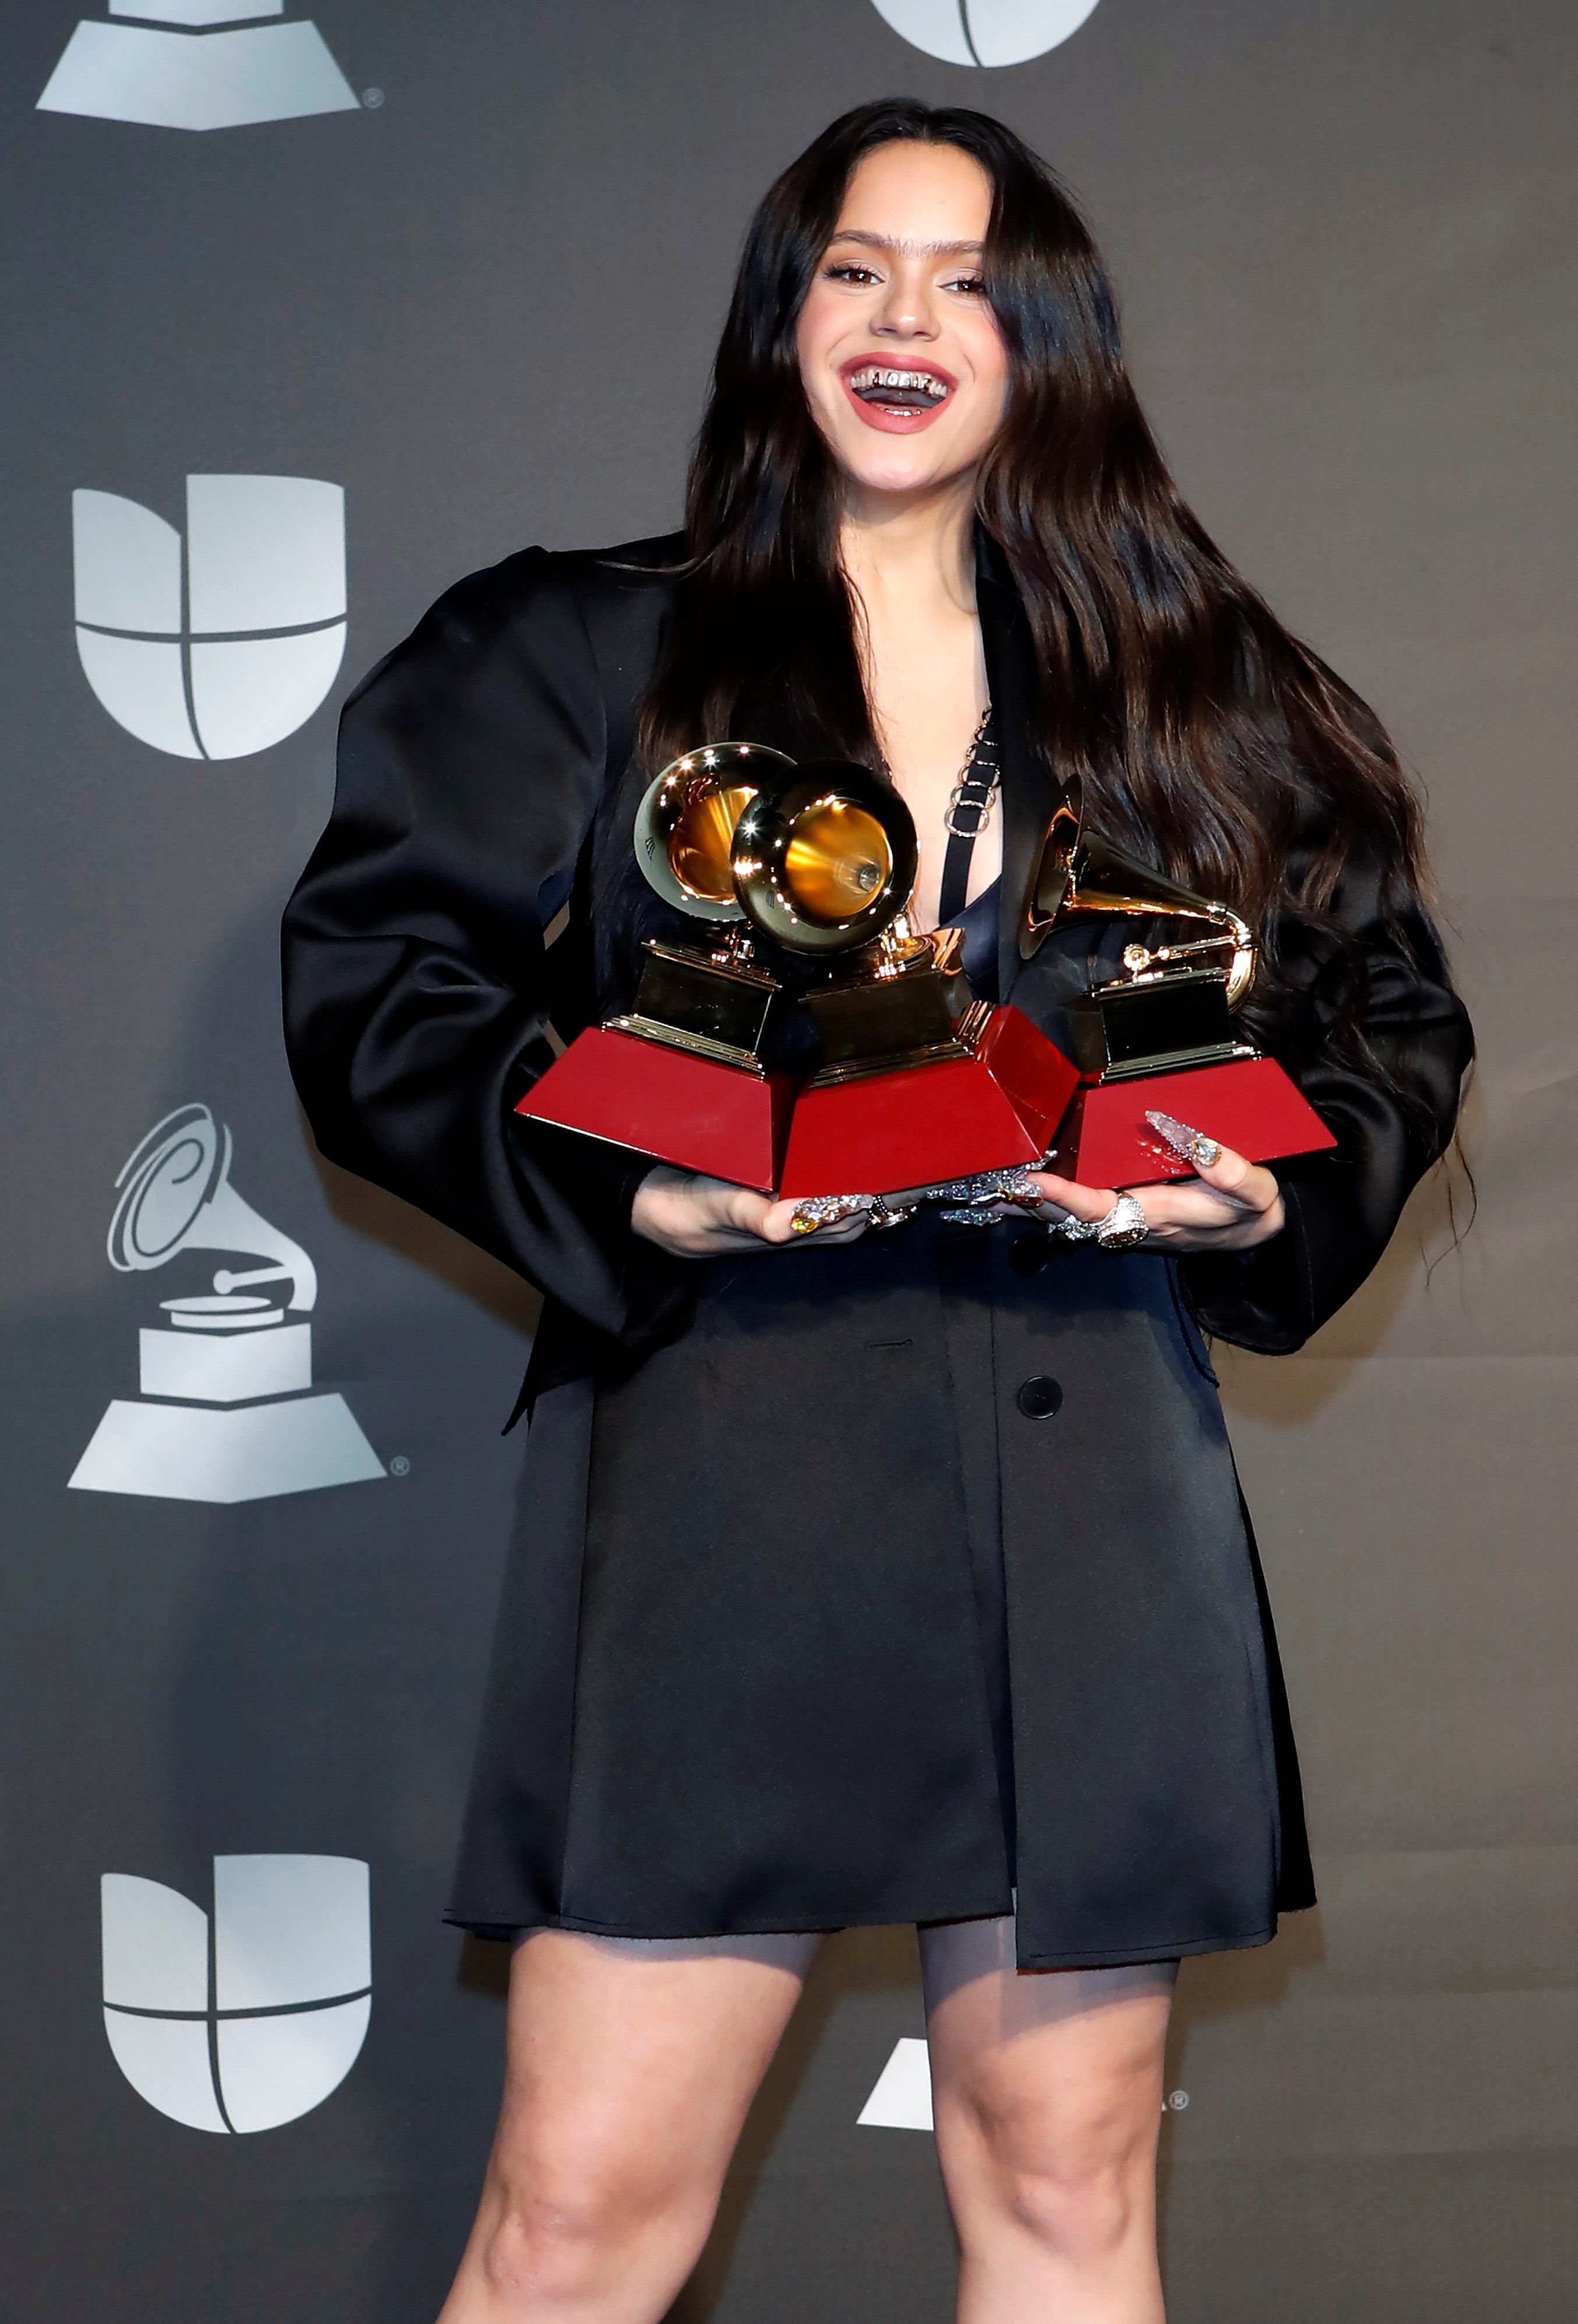 Rosalía, one of the big winners at the Latin Grammys